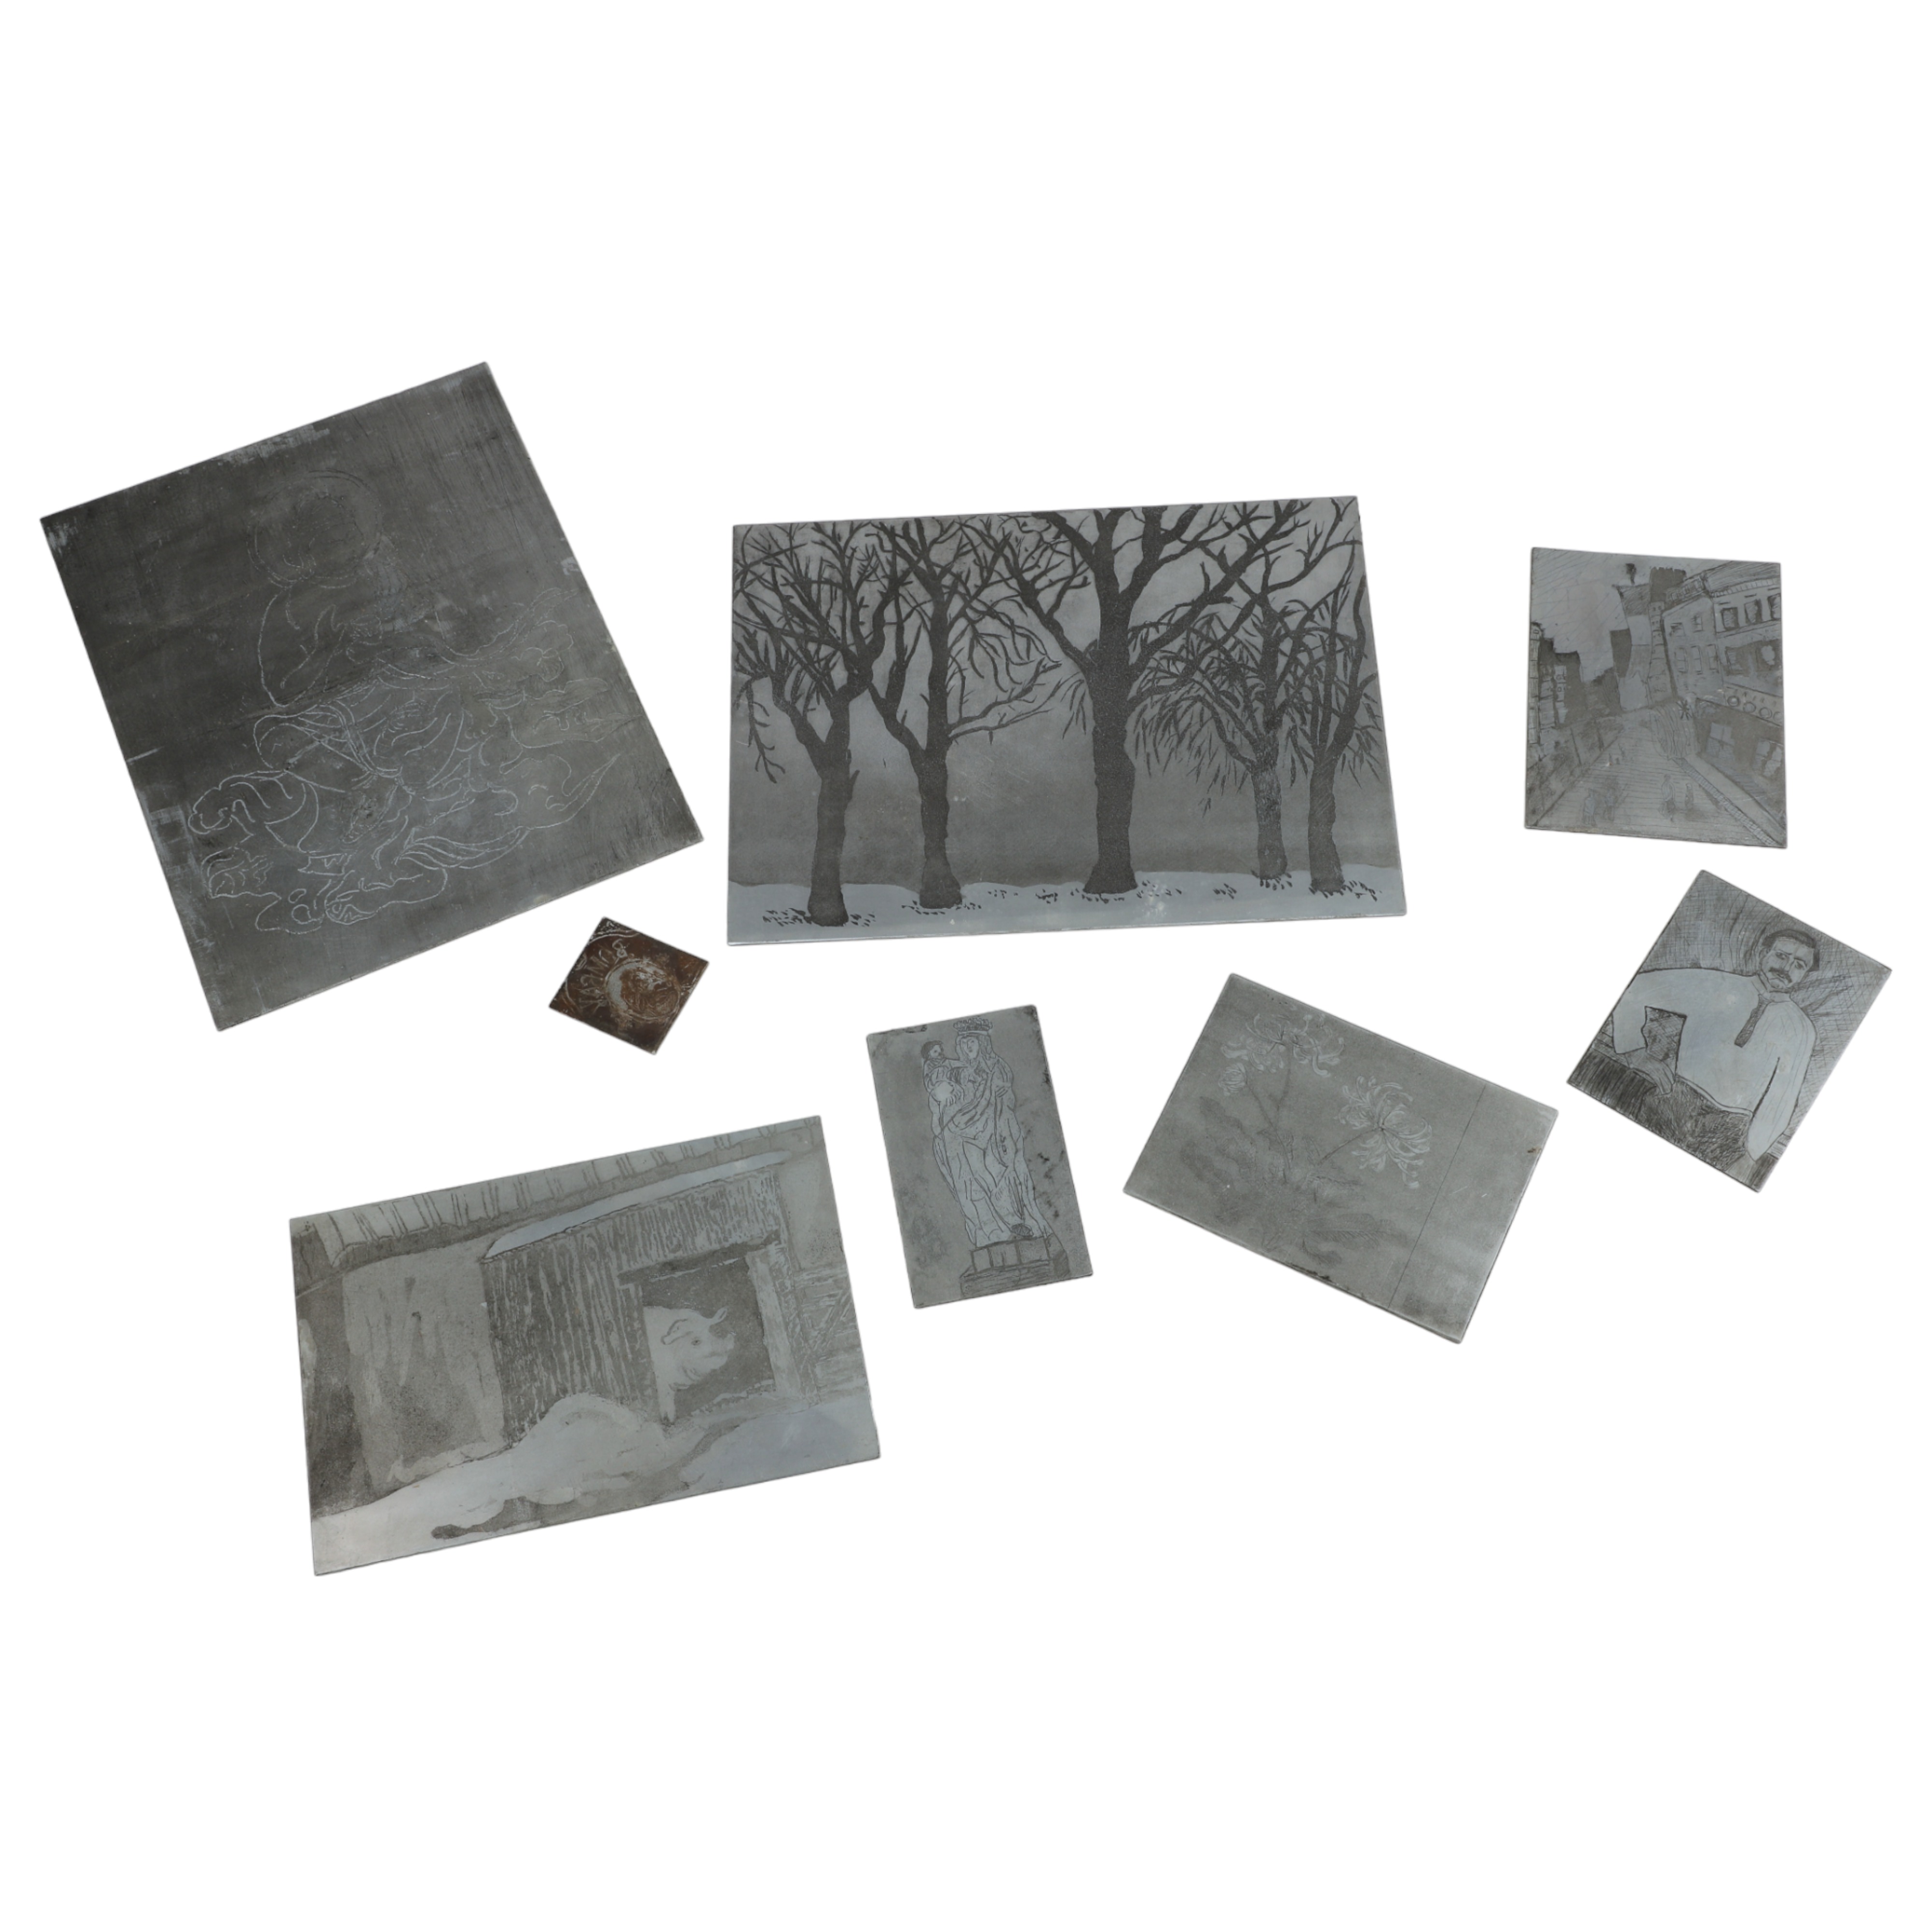 (8) Metal engraving plates, including